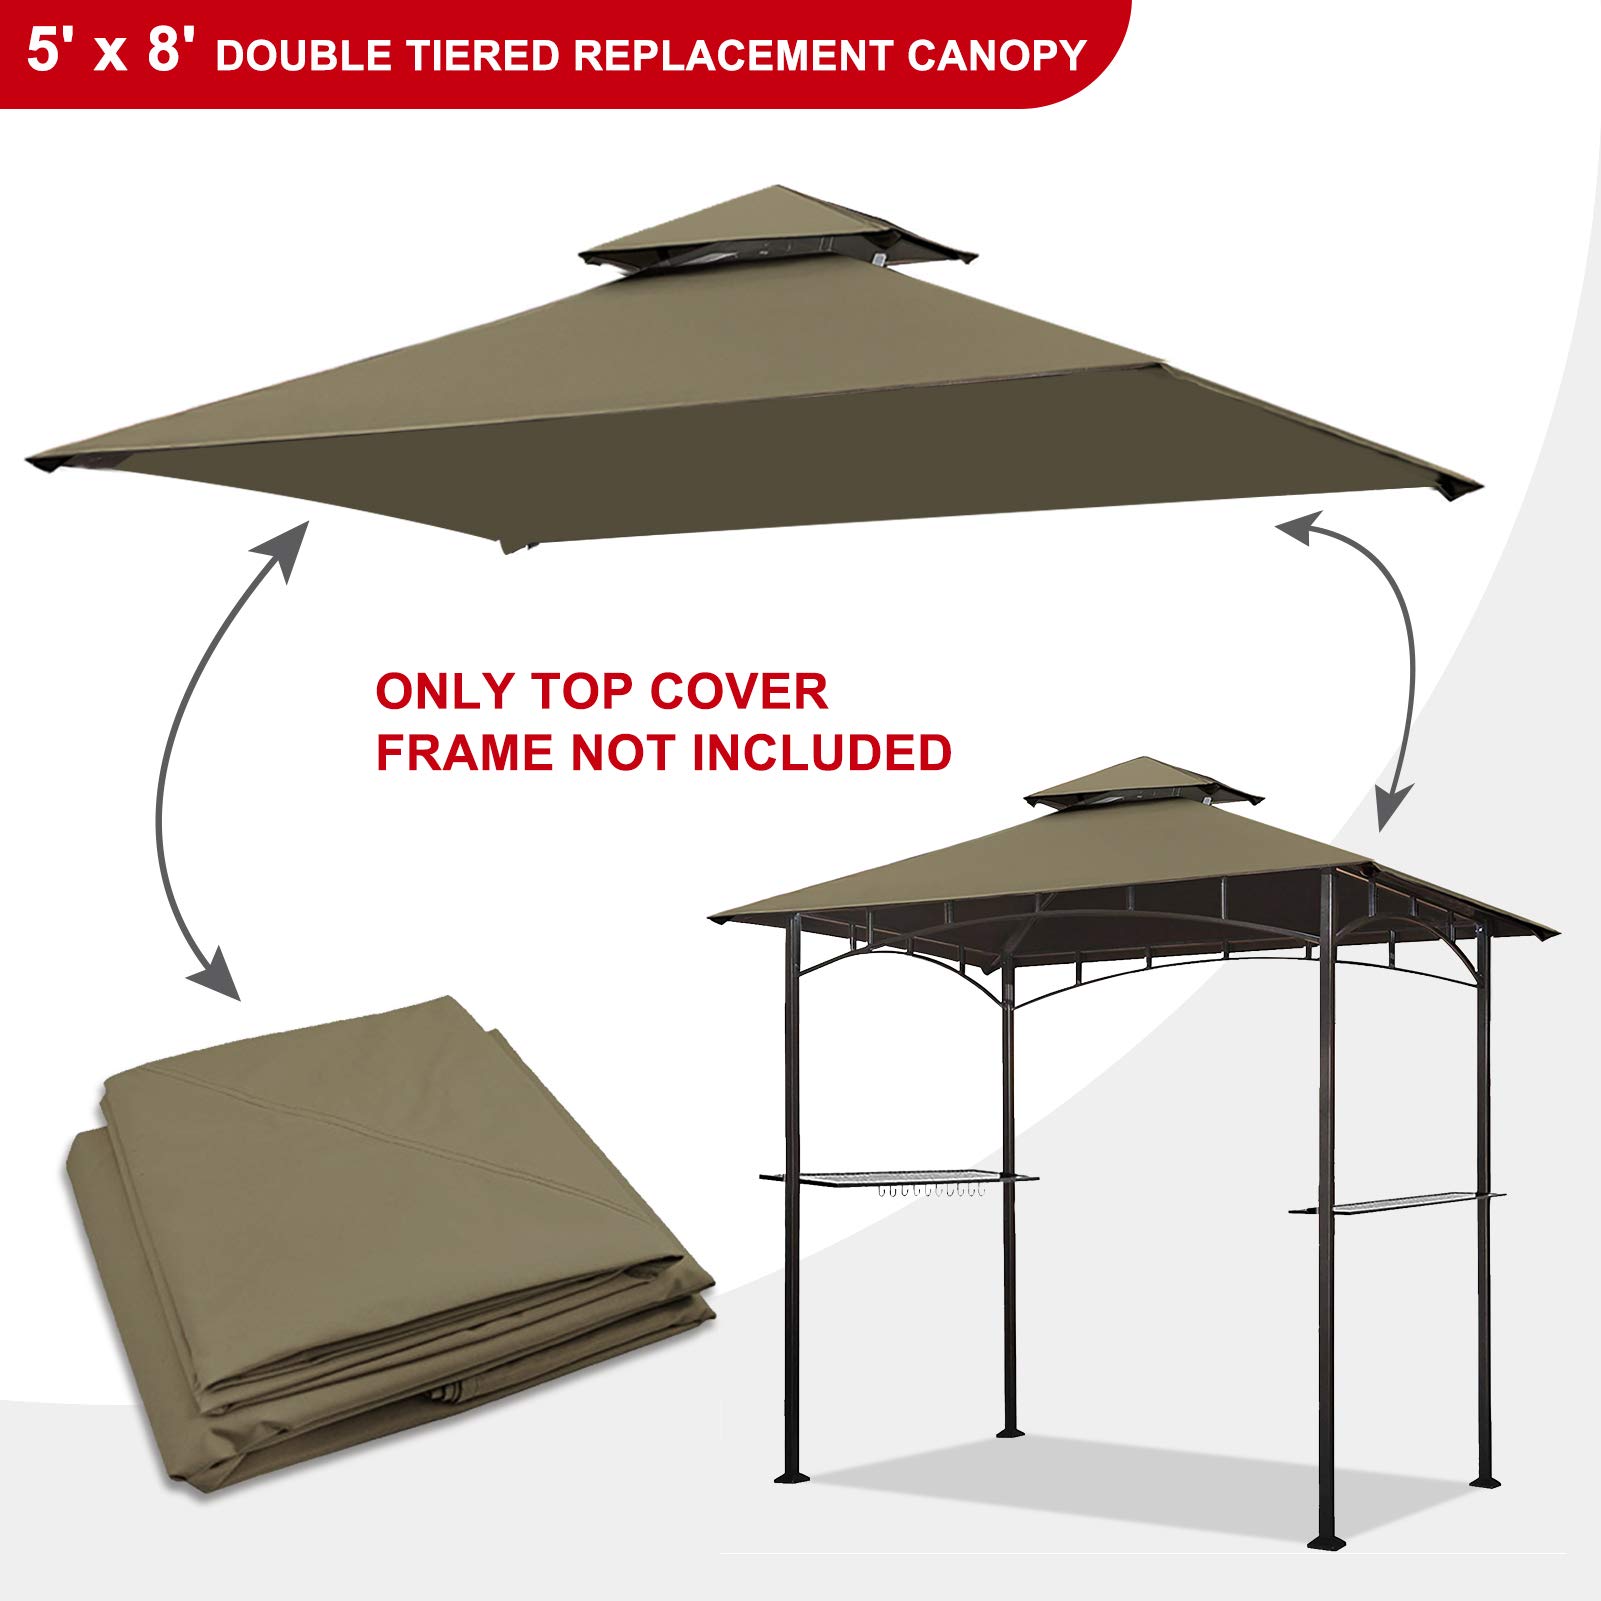 Eurmax USA High Performance Grill Gazebo Canopy Replacement Cover 5x8 BBQ Gazebo Shelter Top（Cocoa